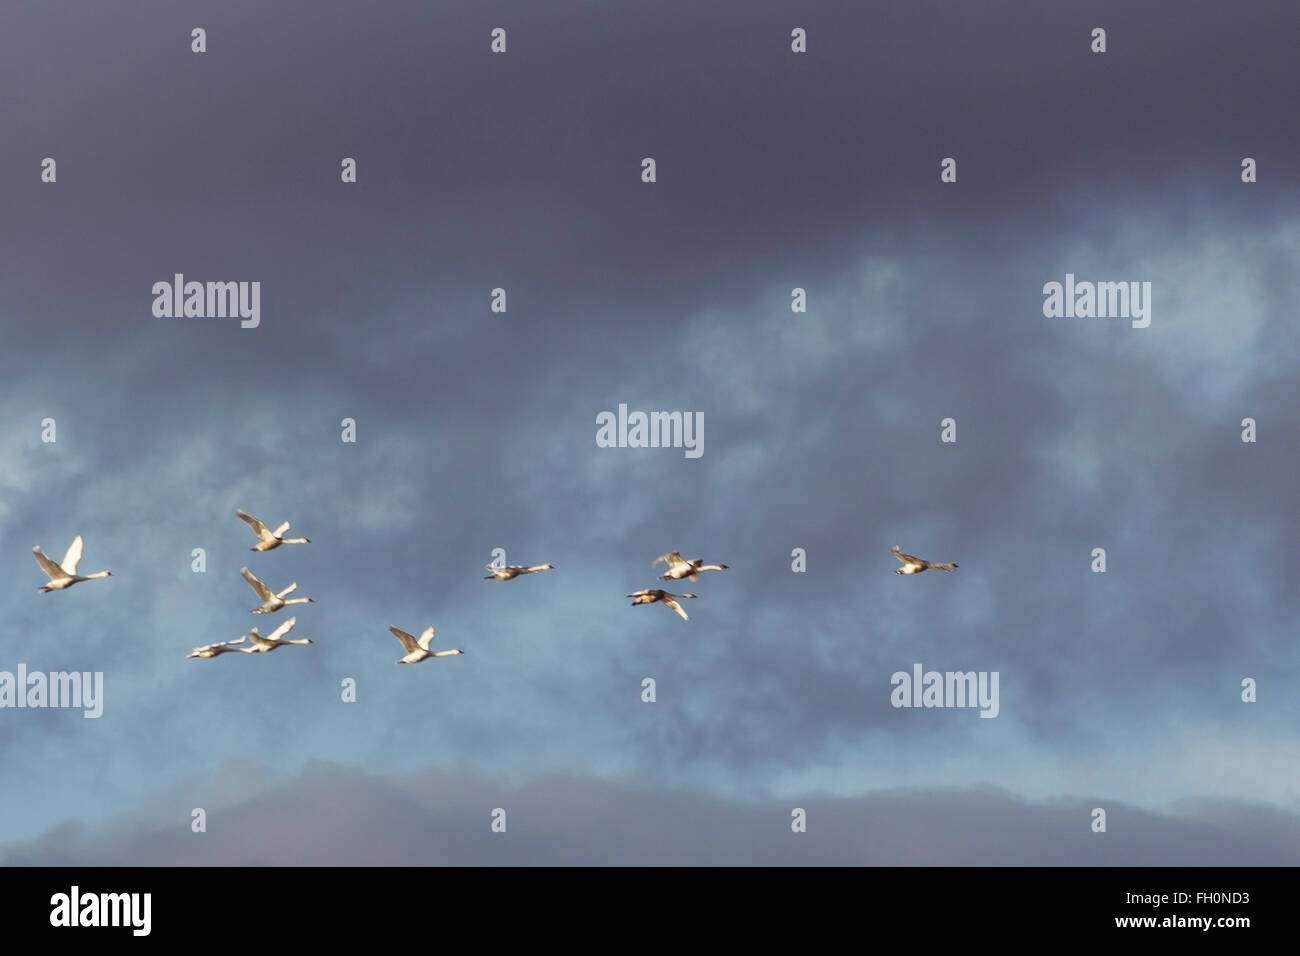 Flock of swans in flight against cloudy sky Stock Photo